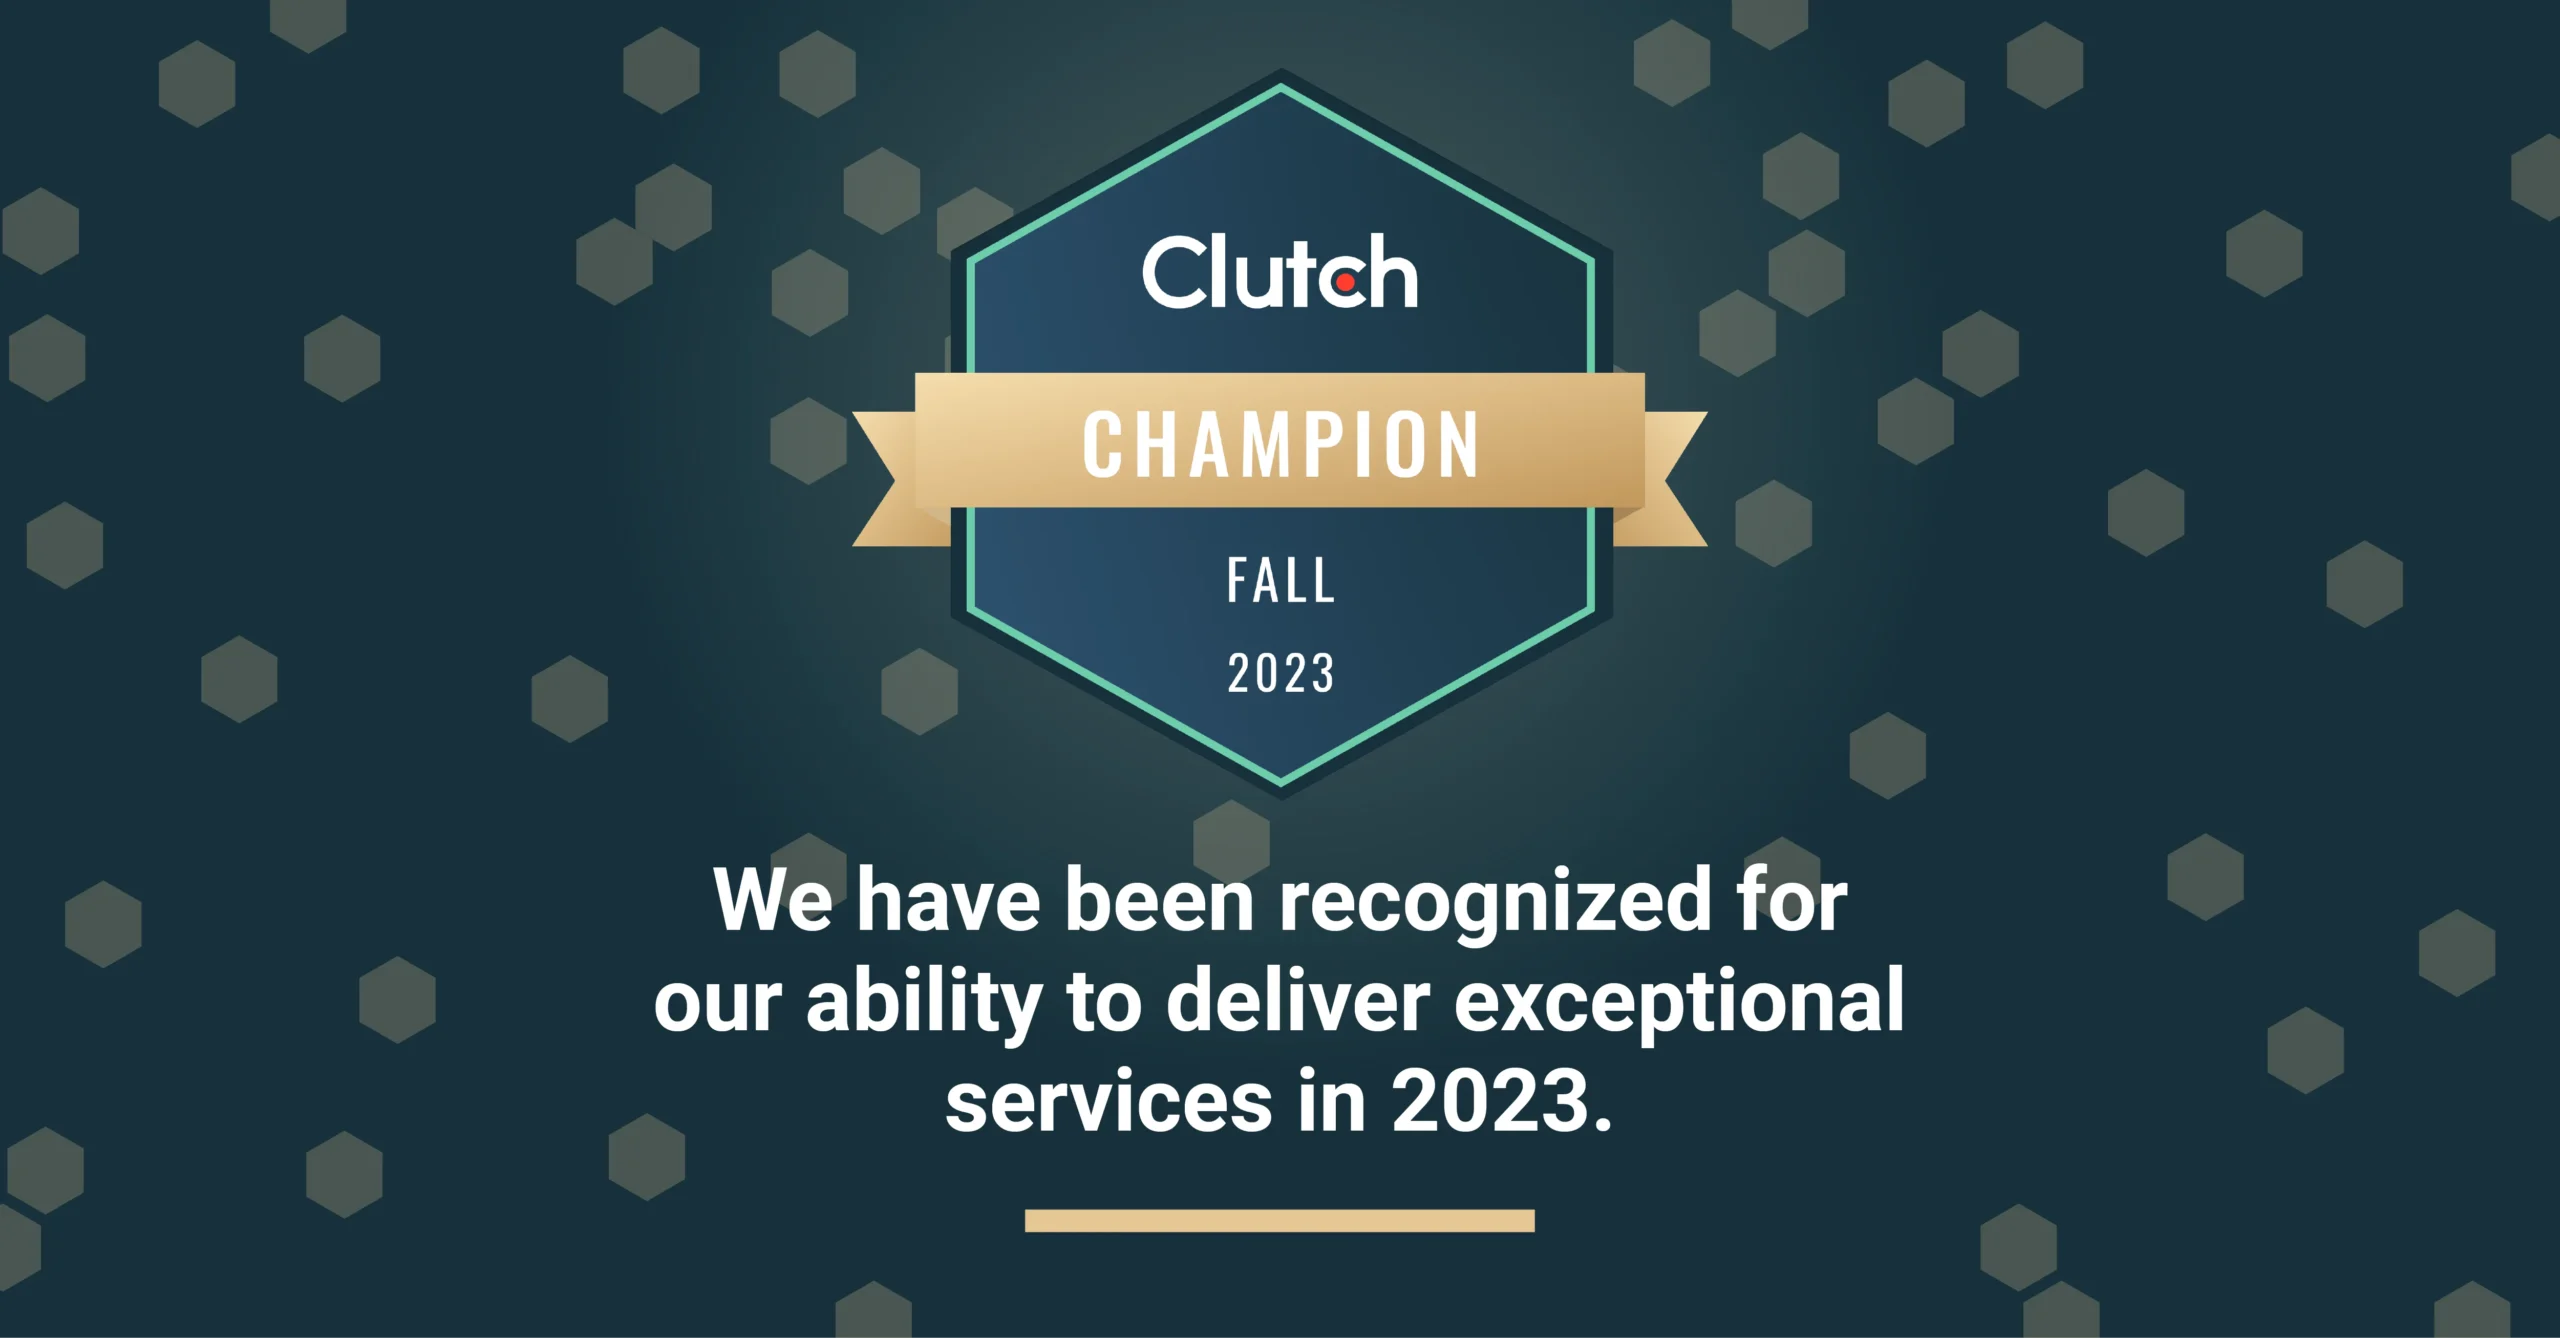 WOW24-7 Clinches Coveted 2023 Clutch Champion and Global Winner Titles